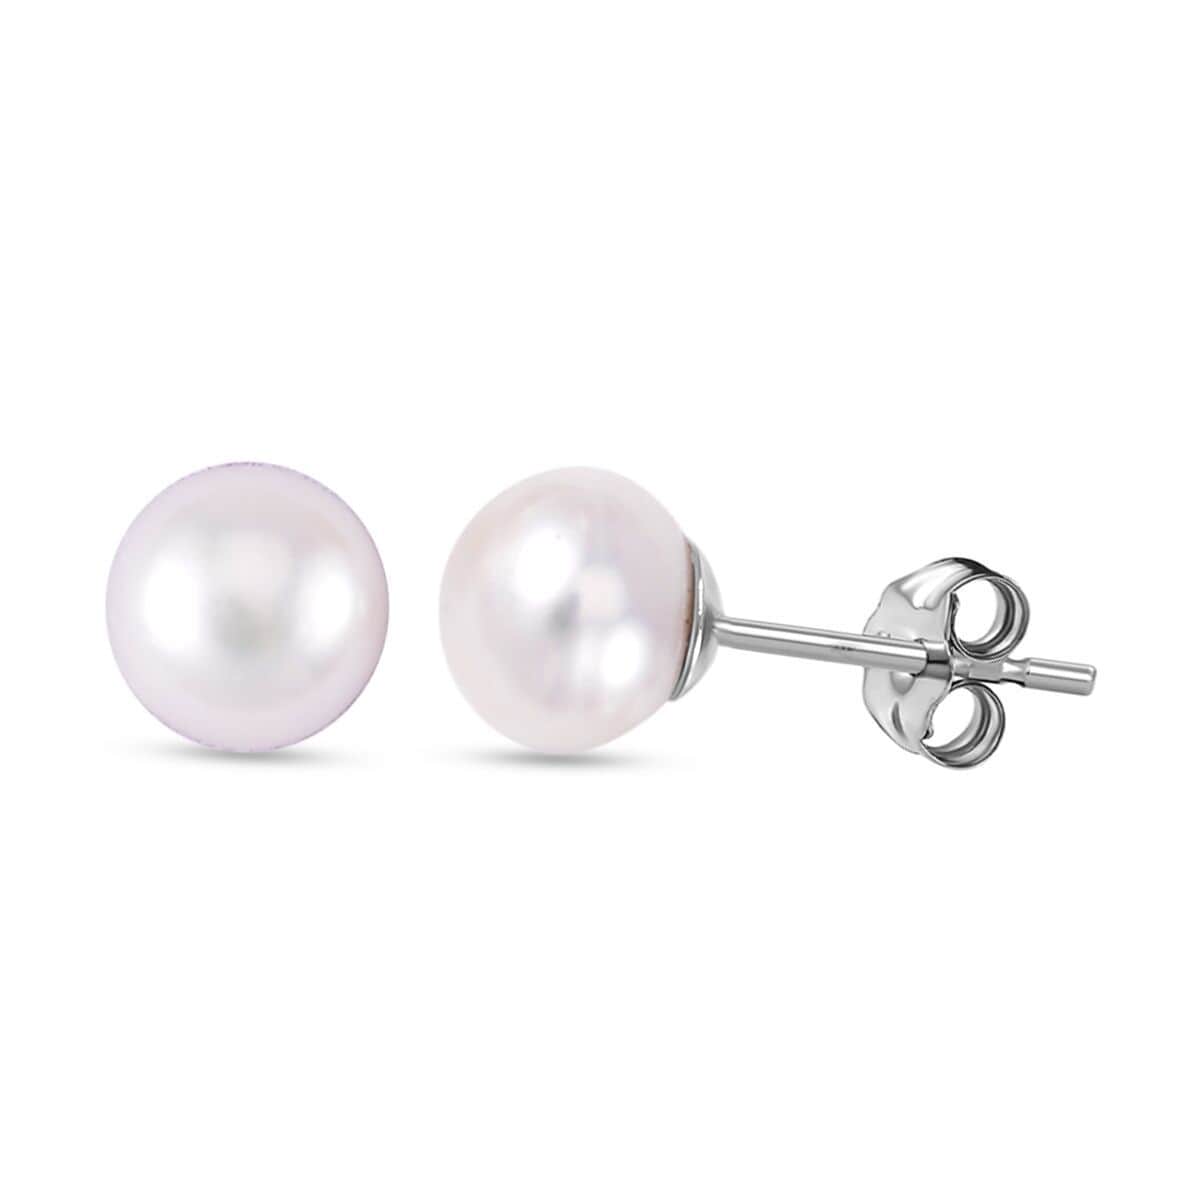 Buy White Freshwater Cultured Pearl Solitaire Stud Earrings and Pendant ...